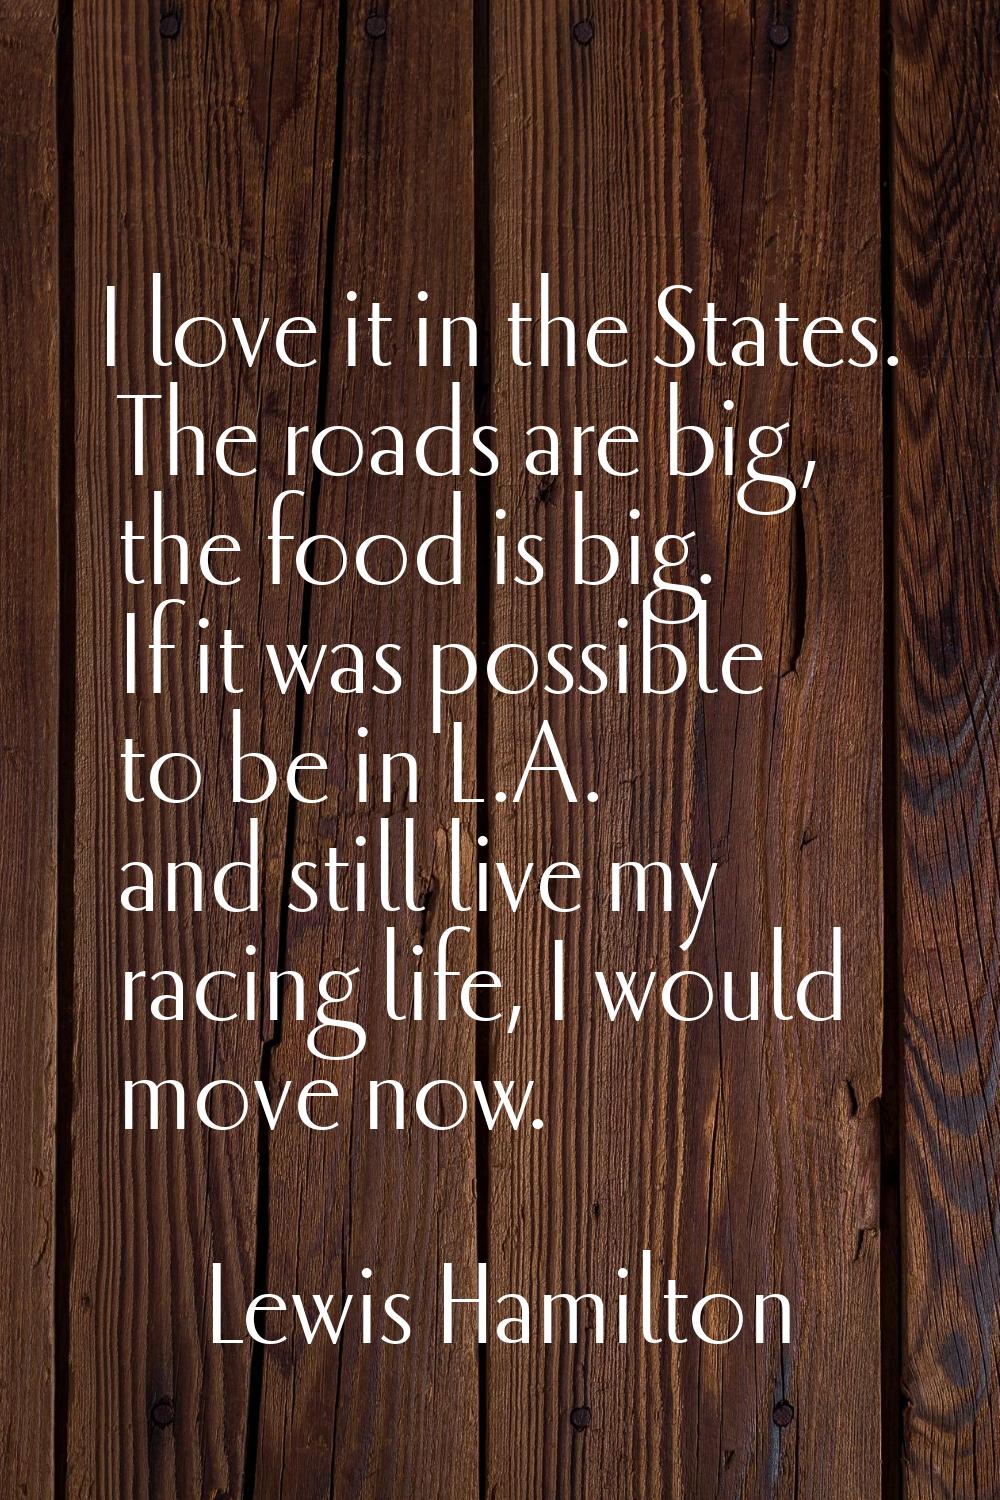 I love it in the States. The roads are big, the food is big. If it was possible to be in L.A. and s